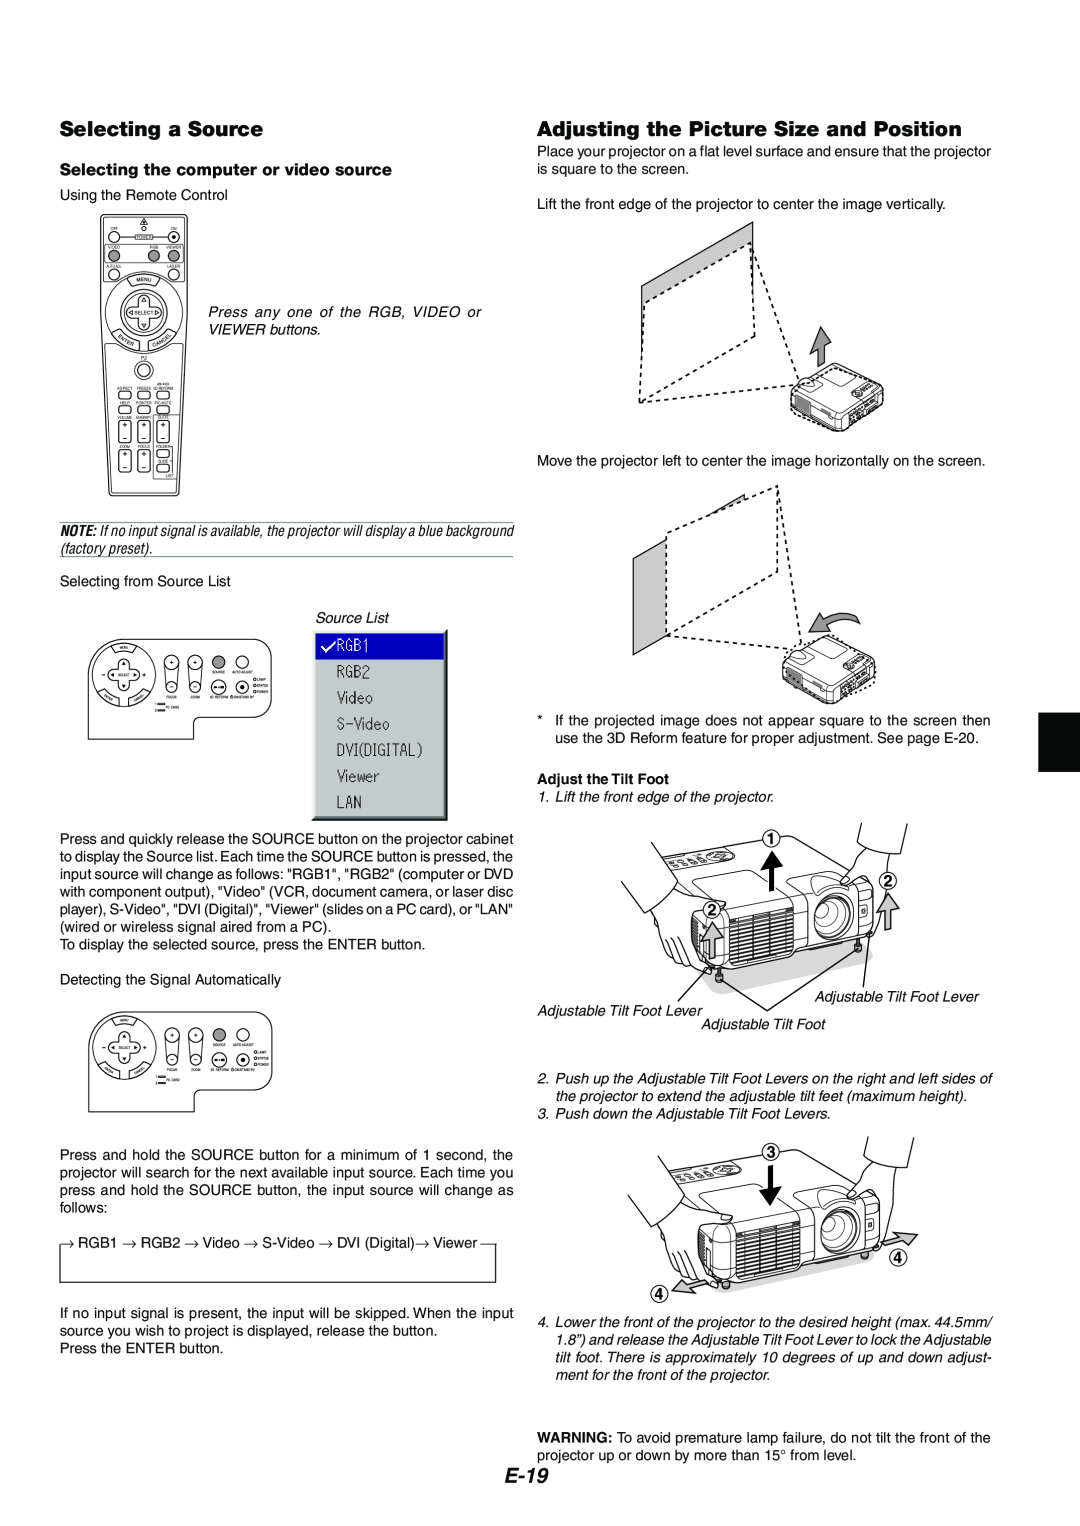 NEC MT1075/MT1065 user manual Selecting a Source, Adjusting the Picture Size and Position, E-19, Adjust the Tilt Foot 